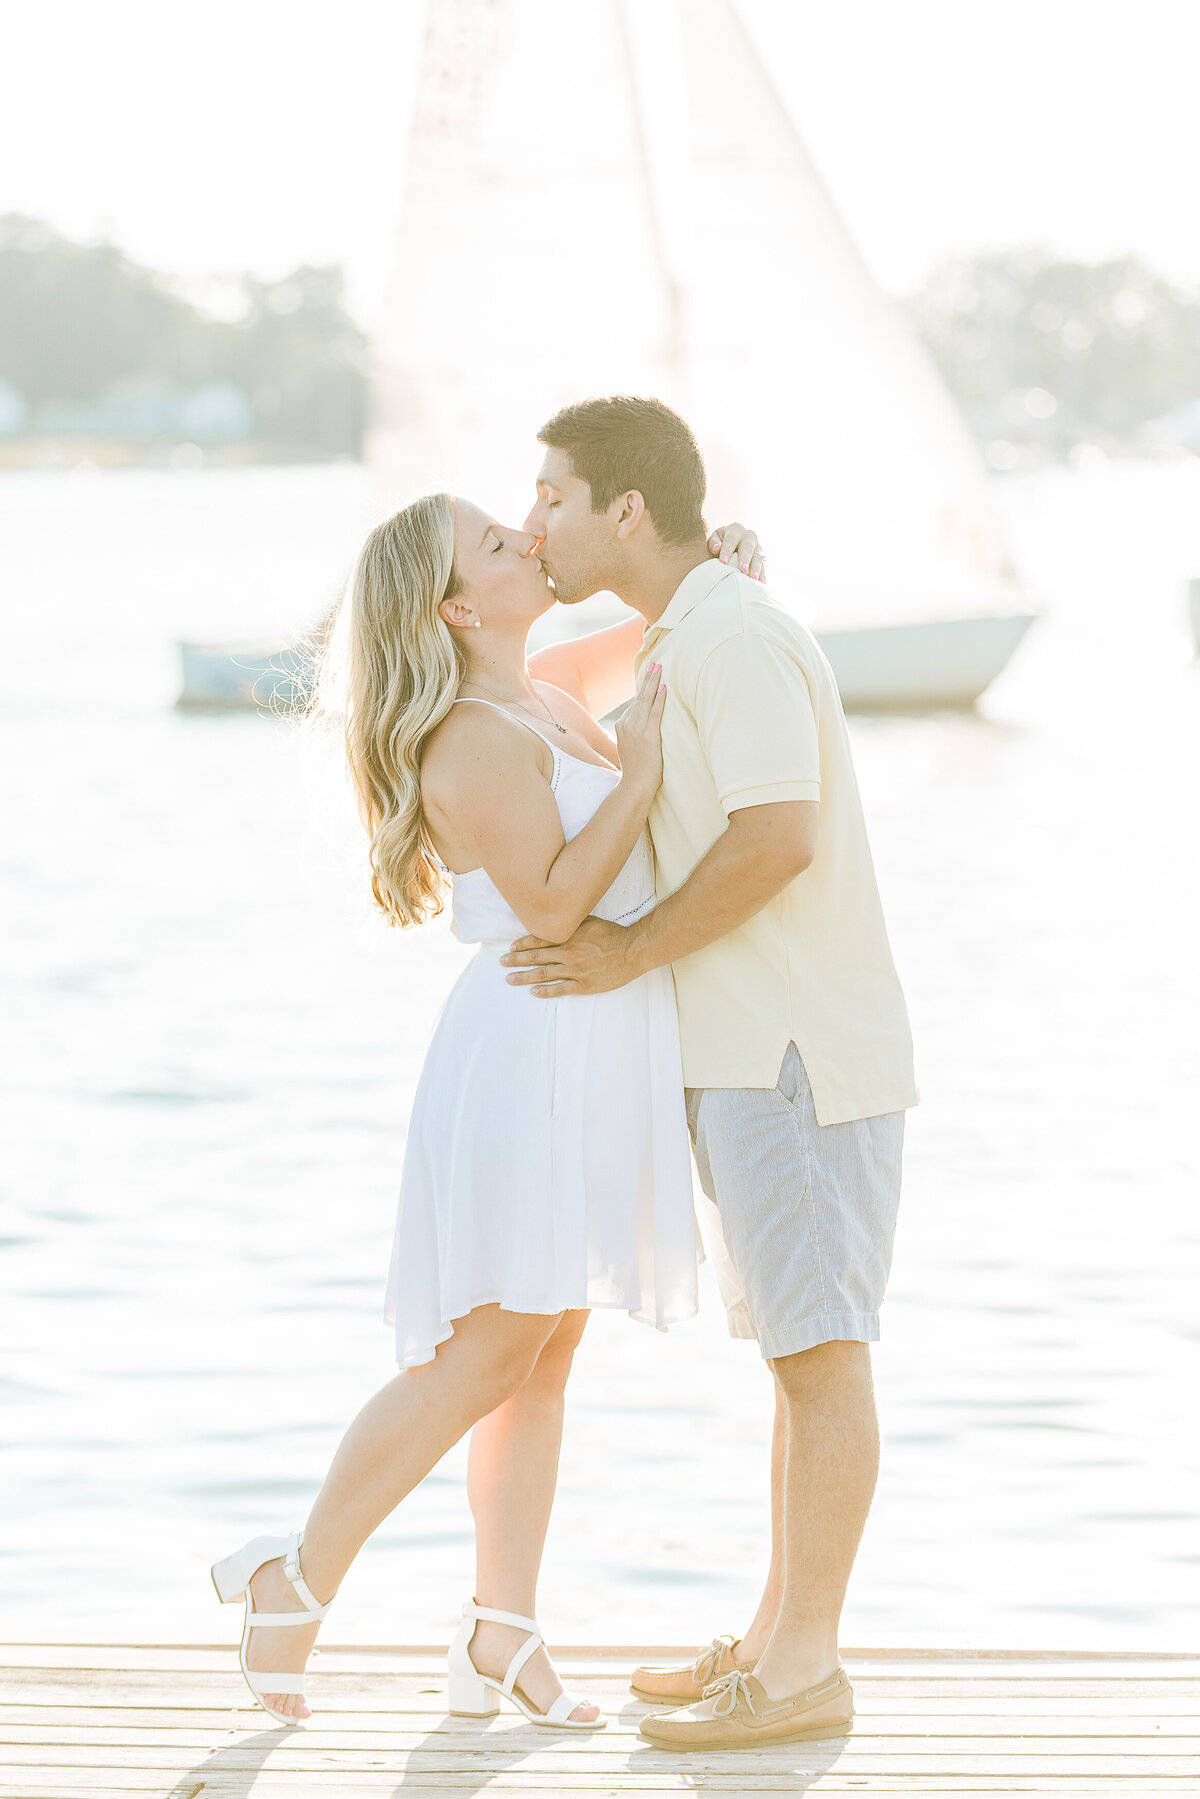 Couple share a kiss on a dock for their Bristol, RI engagement photoshoot. Their is a sailboat passing directly behind them in the background. Captured by Rhode Island Engagement Photographer Lia Rose Weddings